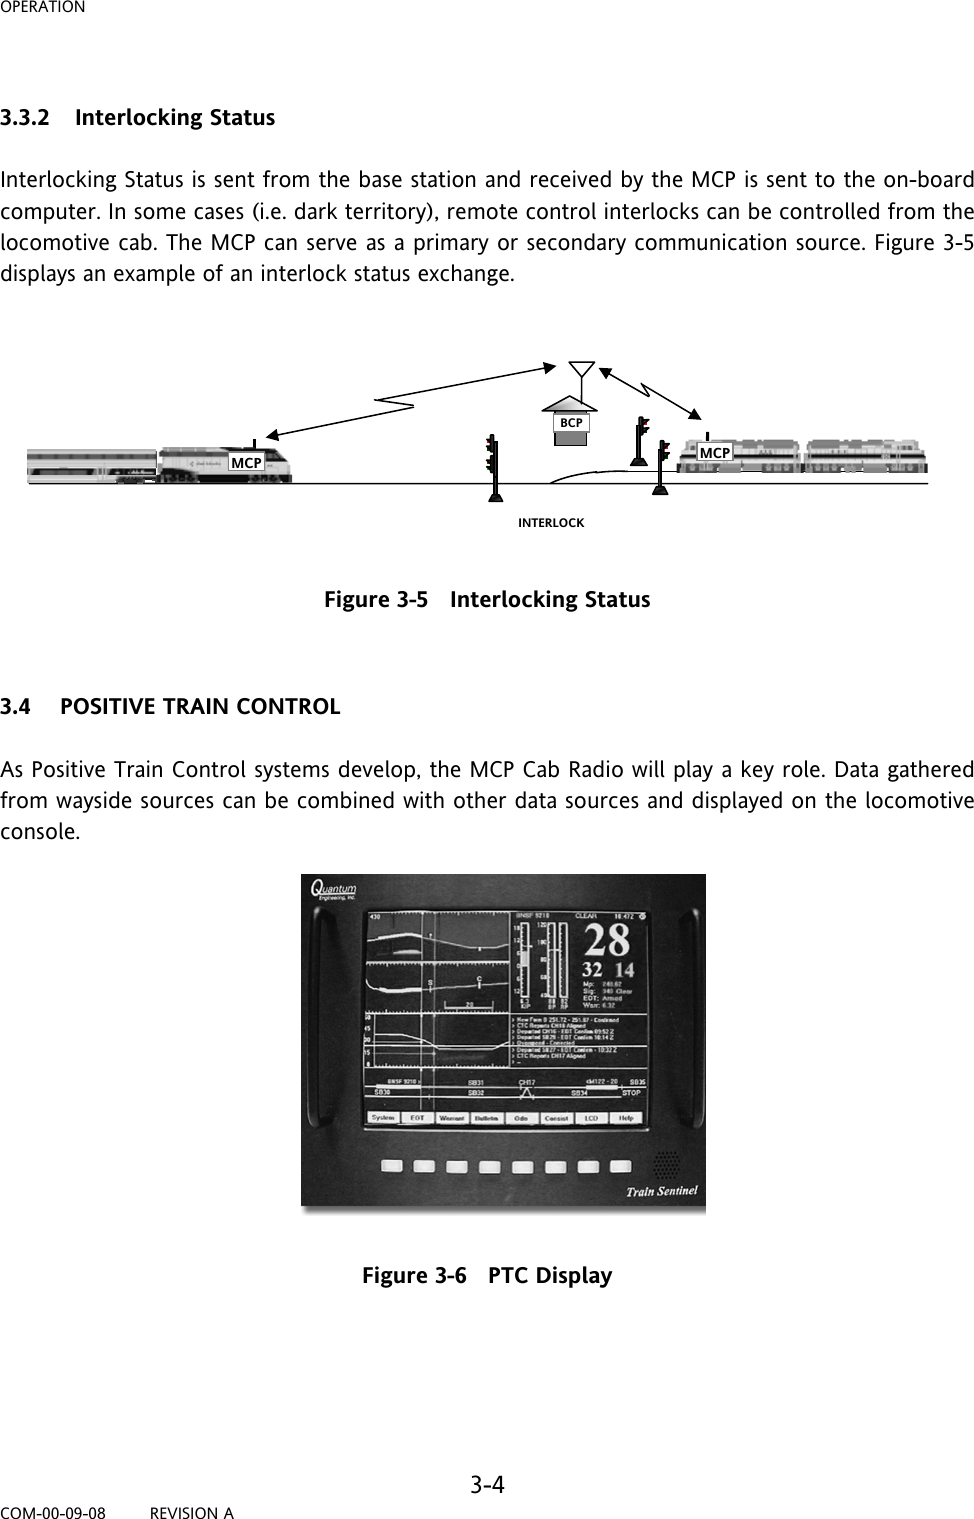 OPERATION     3-4 COM-00-09-08         REVISION A  3.3.2 Interlocking Status  Interlocking Status is sent from the base station and received by the MCP is sent to the on-board computer. In some cases (i.e. dark territory), remote control interlocks can be controlled from the locomotive cab. The MCP can serve as a primary or secondary communication source. Figure 3-5 displays an example of an interlock status exchange.          Figure 3-5   Interlocking Status   3.4 POSITIVE TRAIN CONTROL  As Positive Train Control systems develop, the MCP Cab Radio will play a key role. Data gathered from wayside sources can be combined with other data sources and displayed on the locomotive console.   Figure 3-6   PTC Display     BCP MCP INTERLOCK MCP 